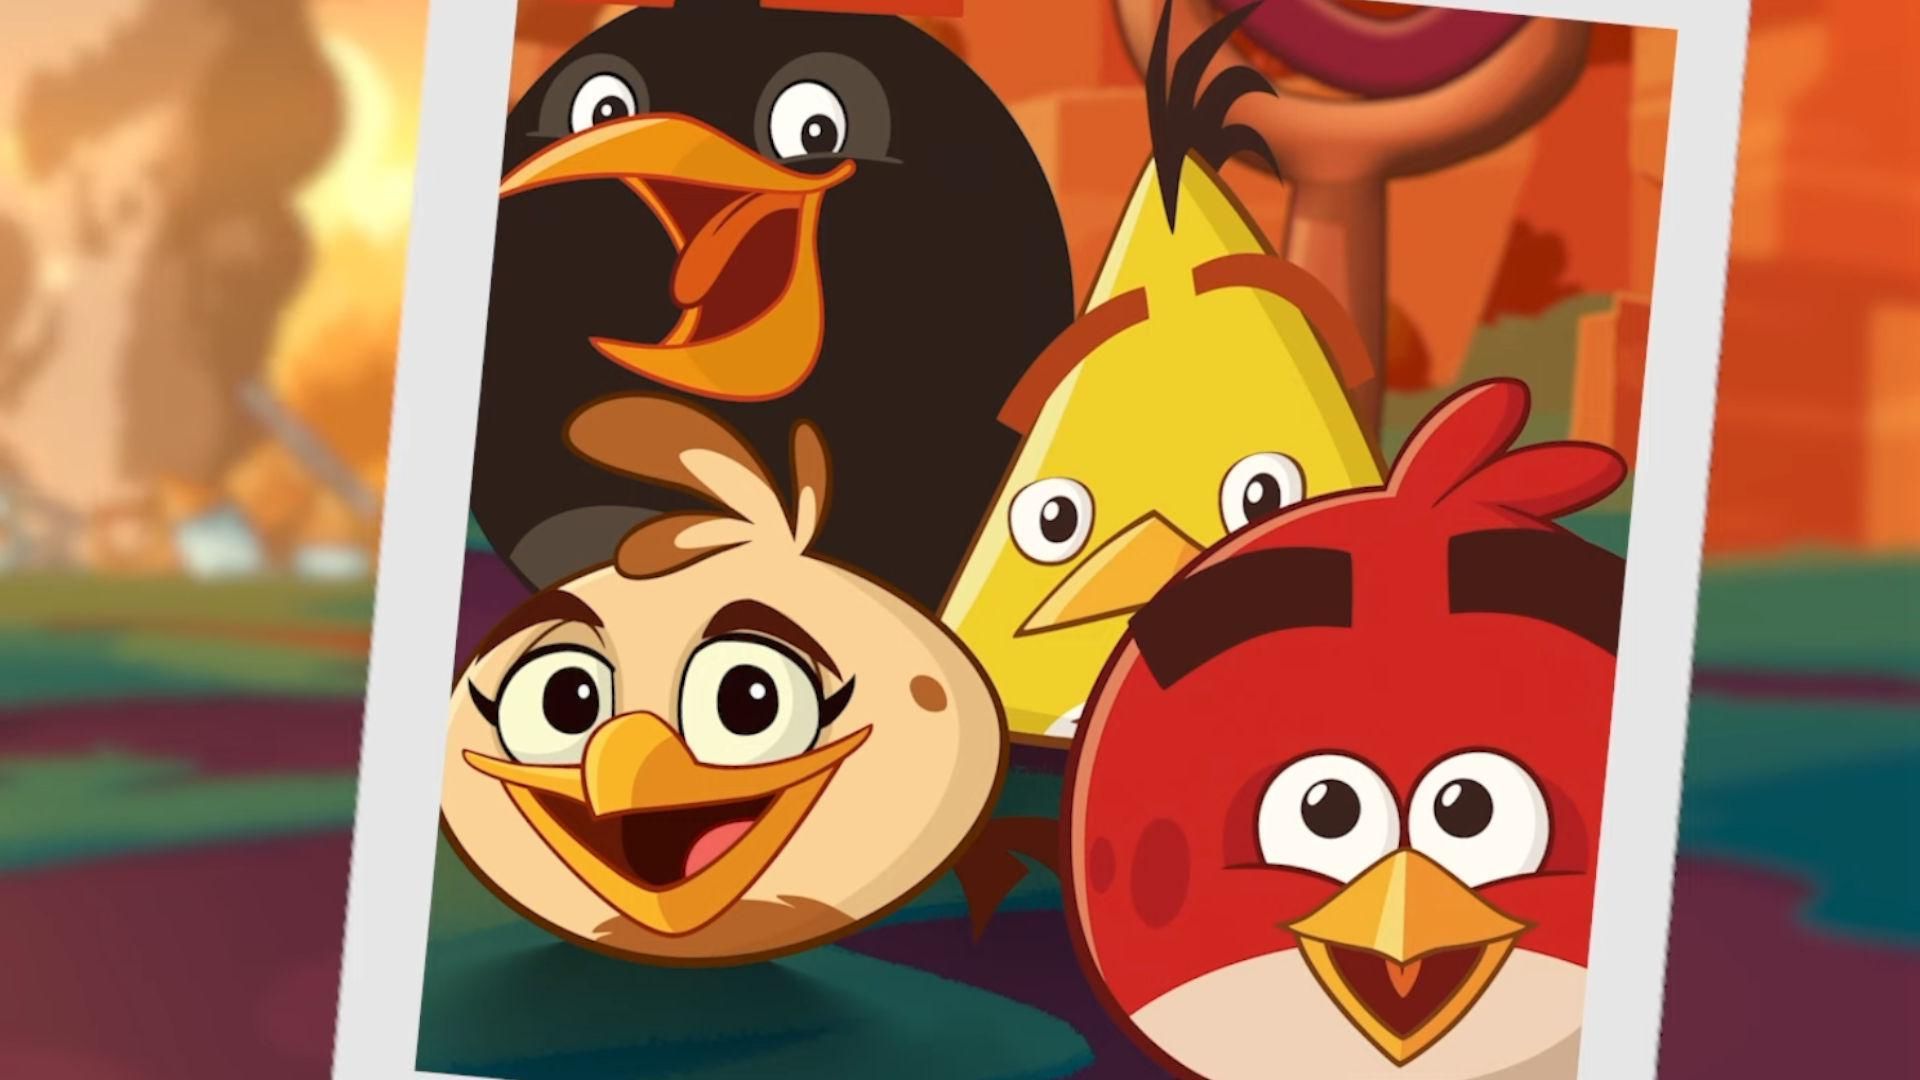 Melody, a new bird protagonist with exceptional musical abilities, has joined Angry Birds 2. You might be wondering how to unlock Melody in Angry Birds 2.... 